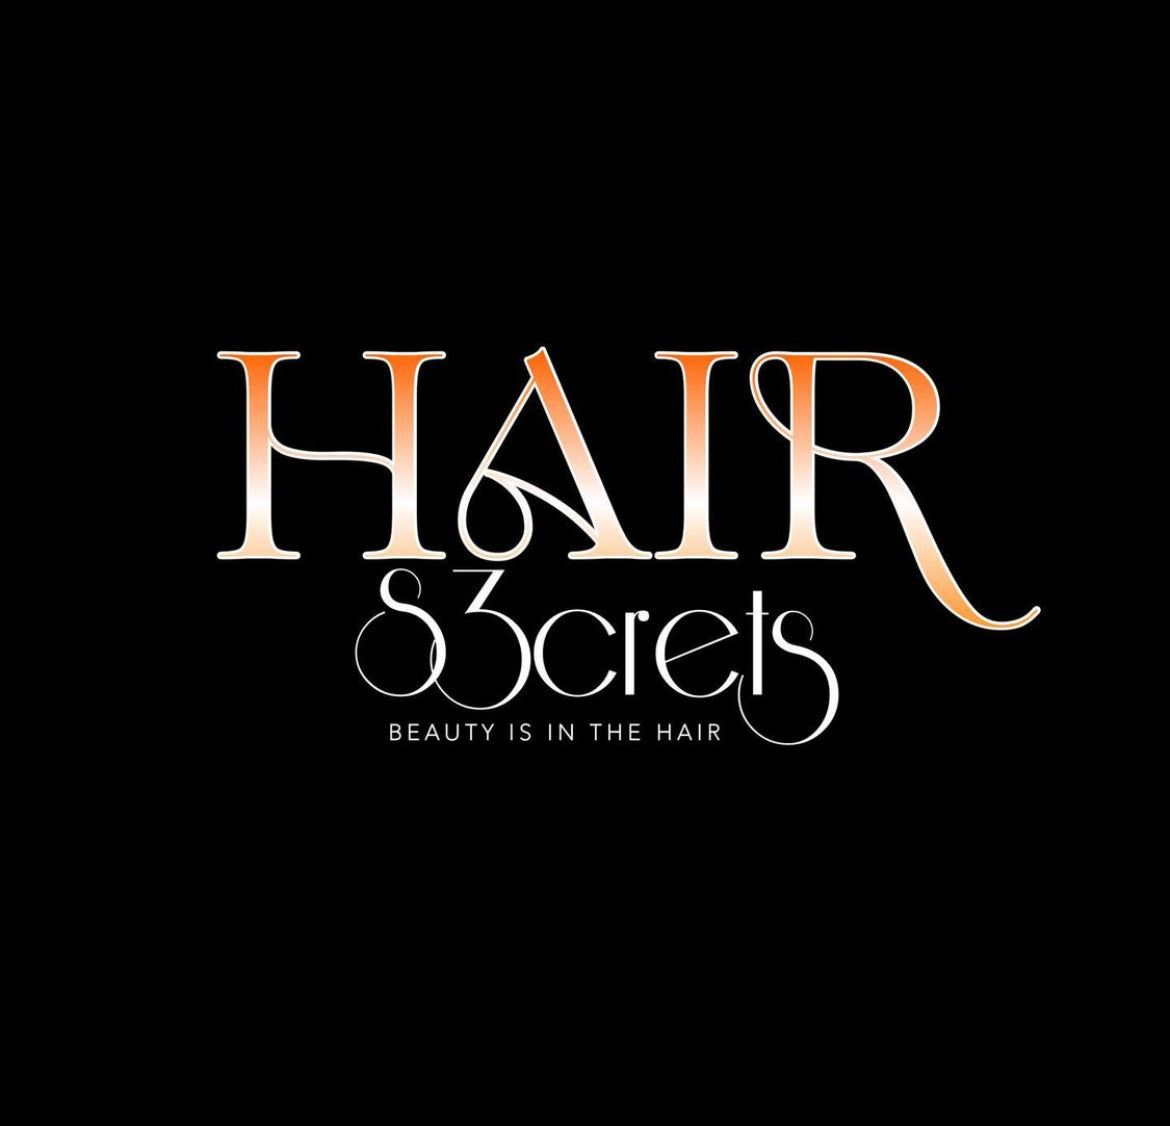 HAIRS3CRETS PRODUCT SETS